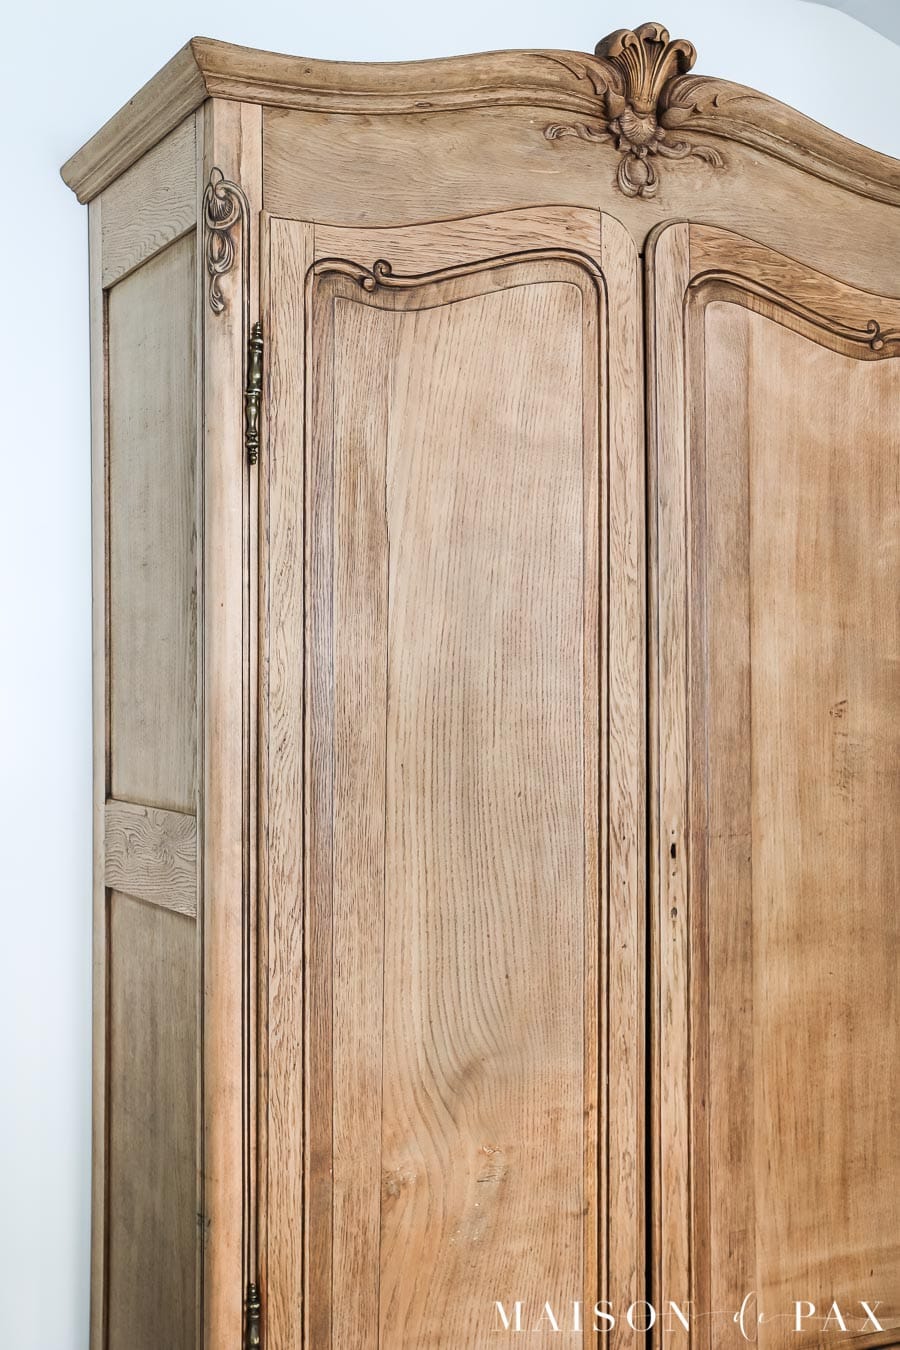 stripped oak armoire, french antique style